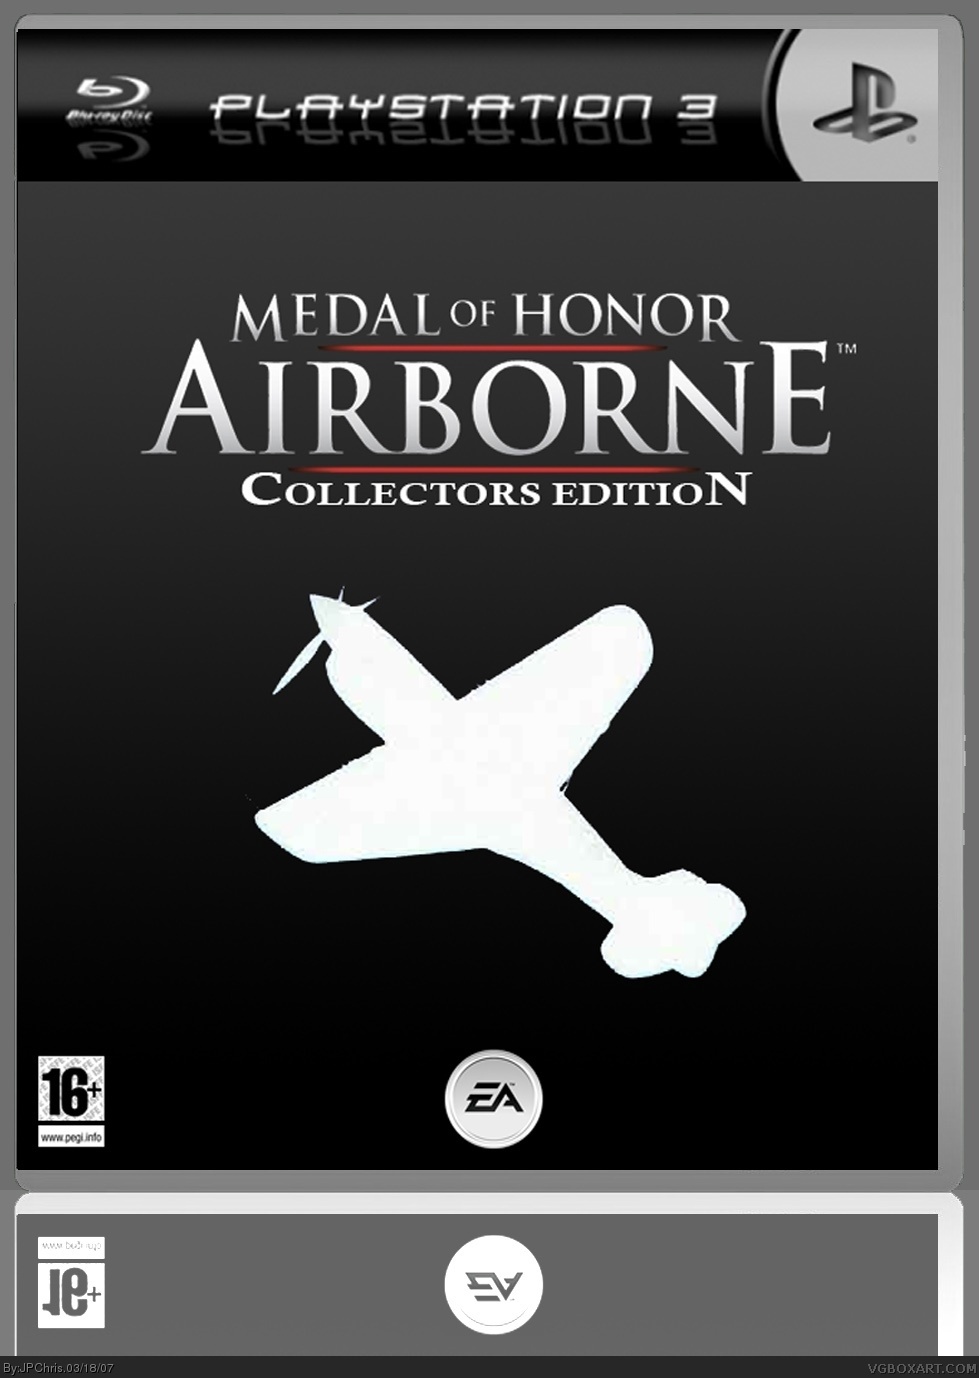 Medal of Honor Airbourne box cover